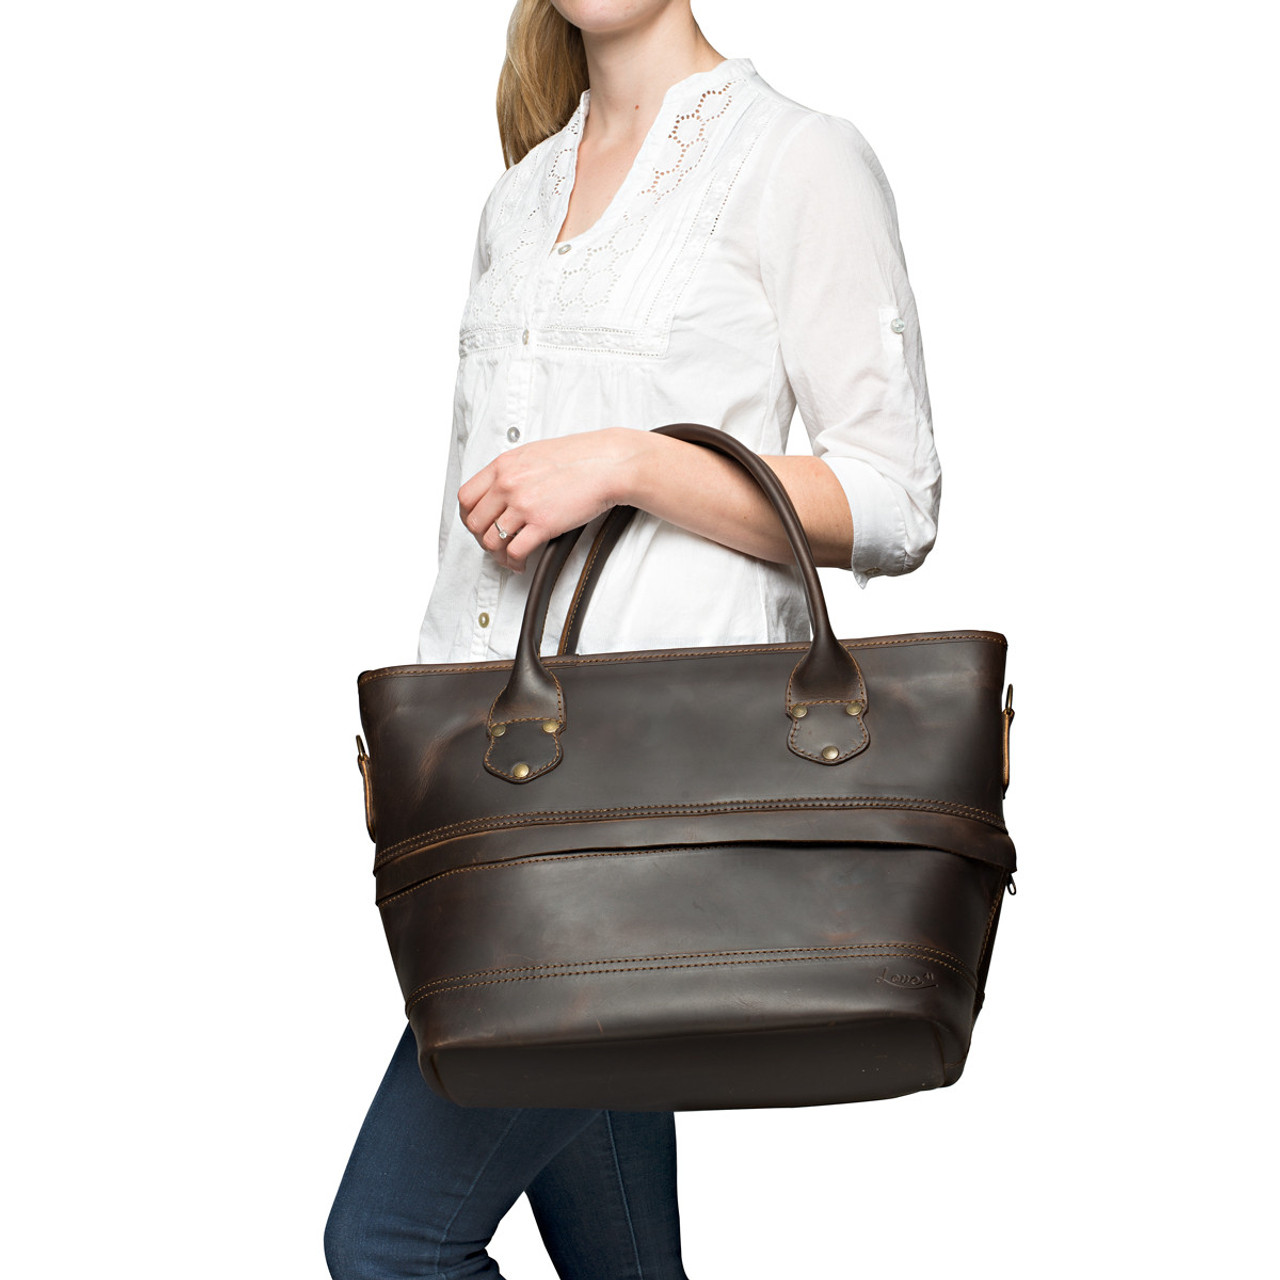 Rustico AC0605-0002 Charter Zippered Large Leather Tote Bag in Saddle